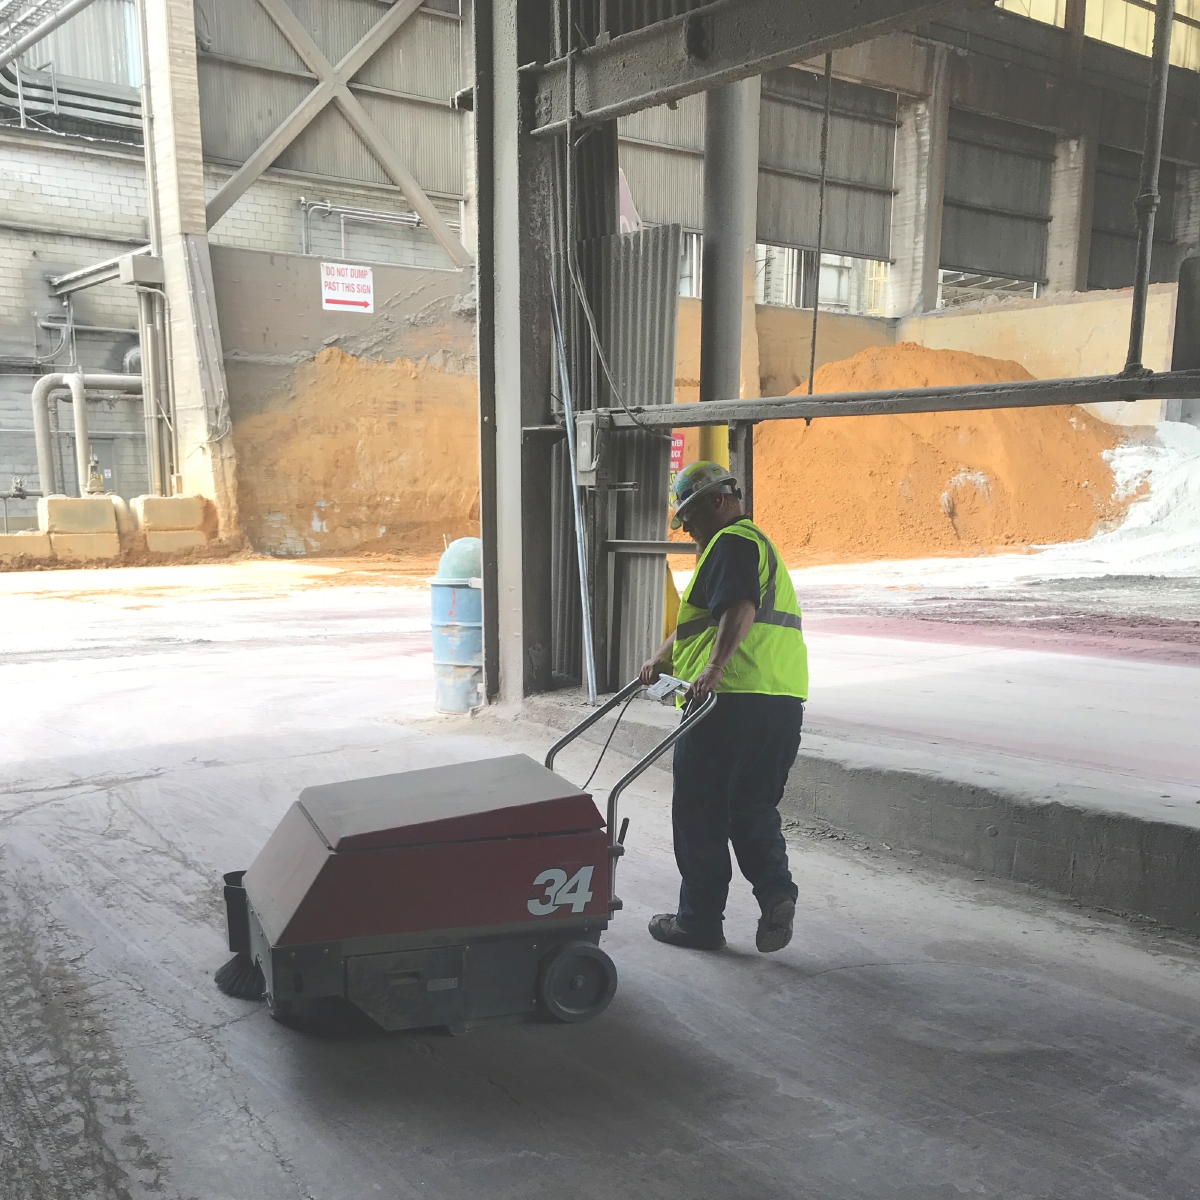 Factory Cat's Floor Sweepers are built to sweep factories: dirt, dust, metal shavings, foundry sand, bolts, paper, wood, whatever there is. Factory Cat's are compact, not light-duty.